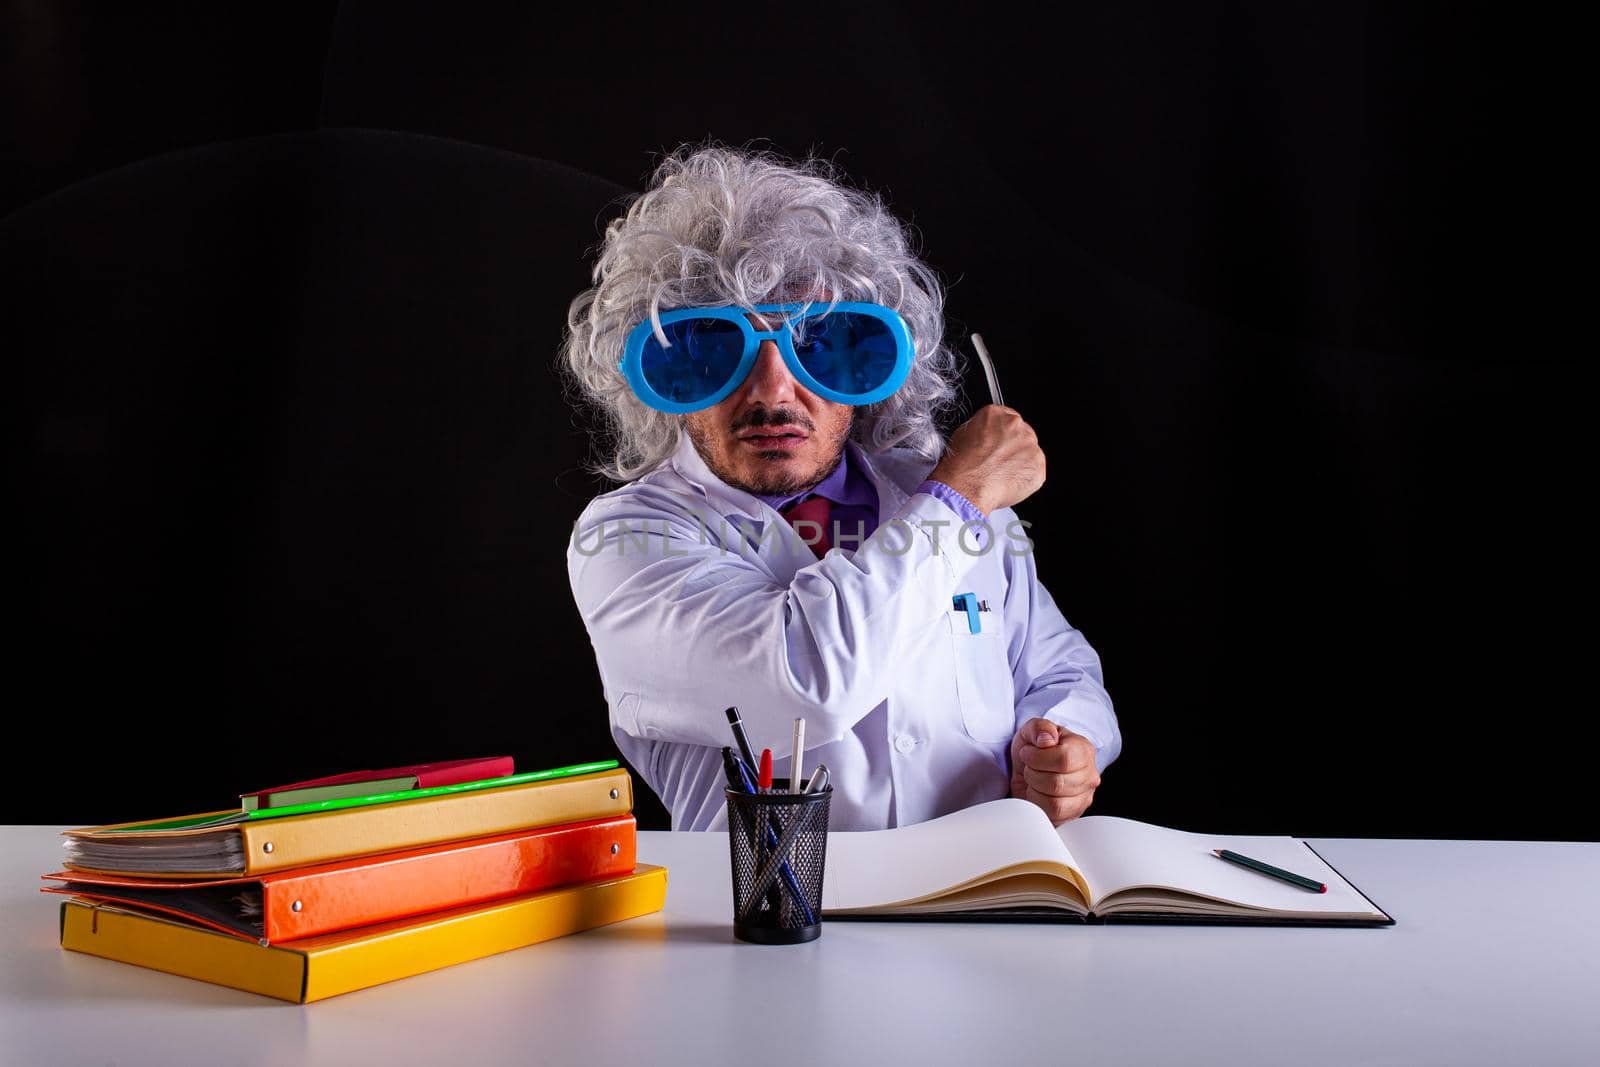 Crazy science teacher in white coat with unkempt hair in funny eye glasses sitting at the desk by bepsimage